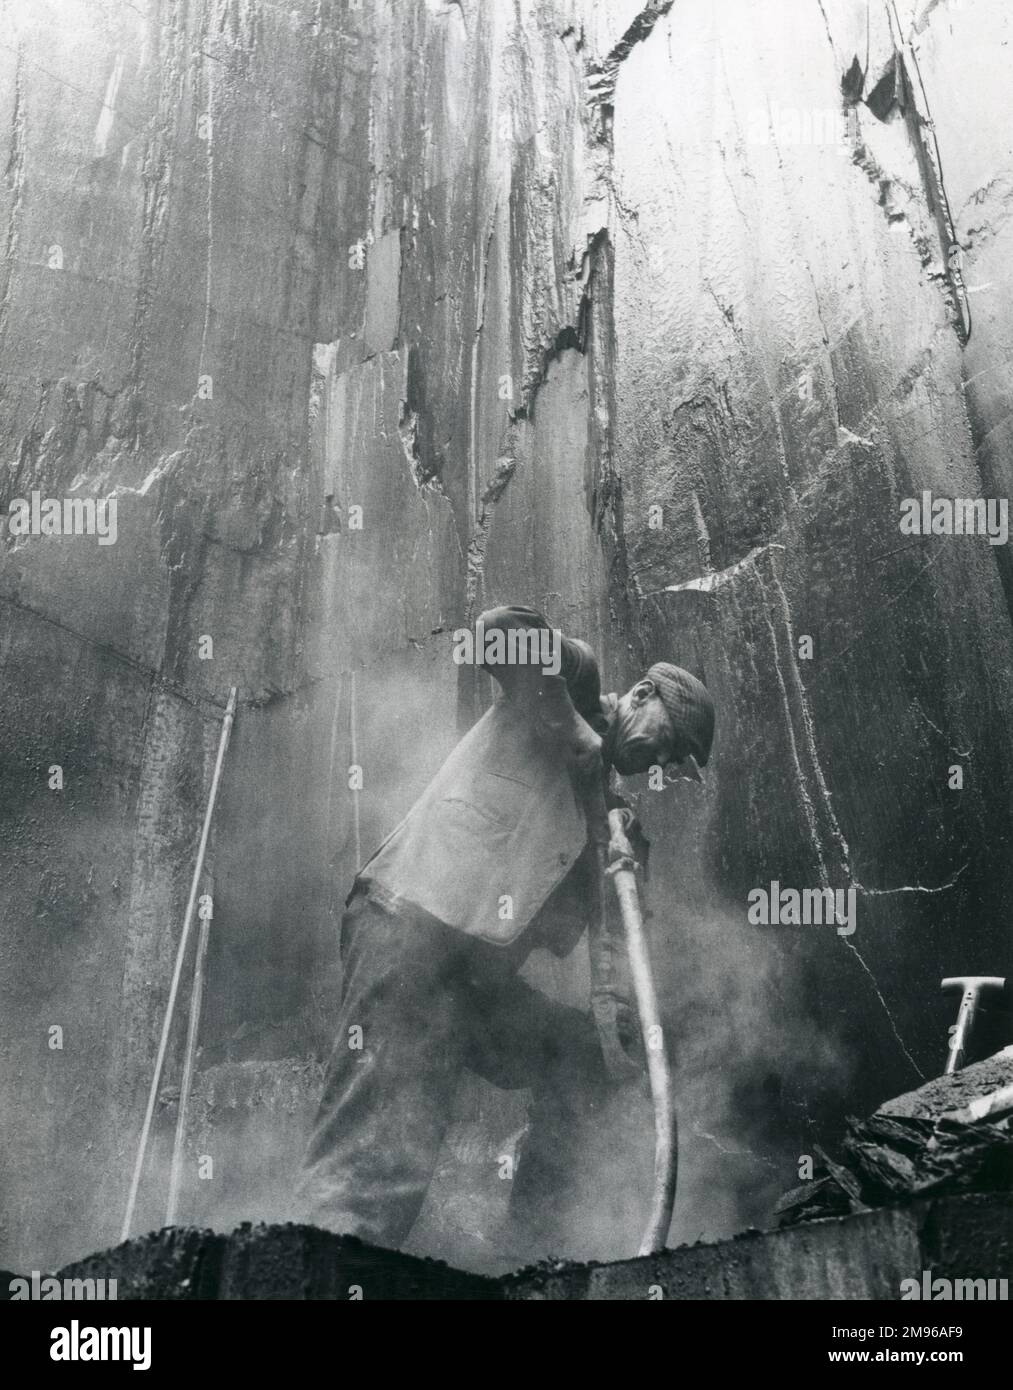 A quarryman drilling into the rock at Penyrorsedd Slate Quarry, Nantlle Valley, Caernarvonshire (now Gwynedd), North Wales. The silica dust in the air is lethal, giving rise to silicosis, an incurable respiratory disease affecting most slate quarry workers in middle age. Stock Photo